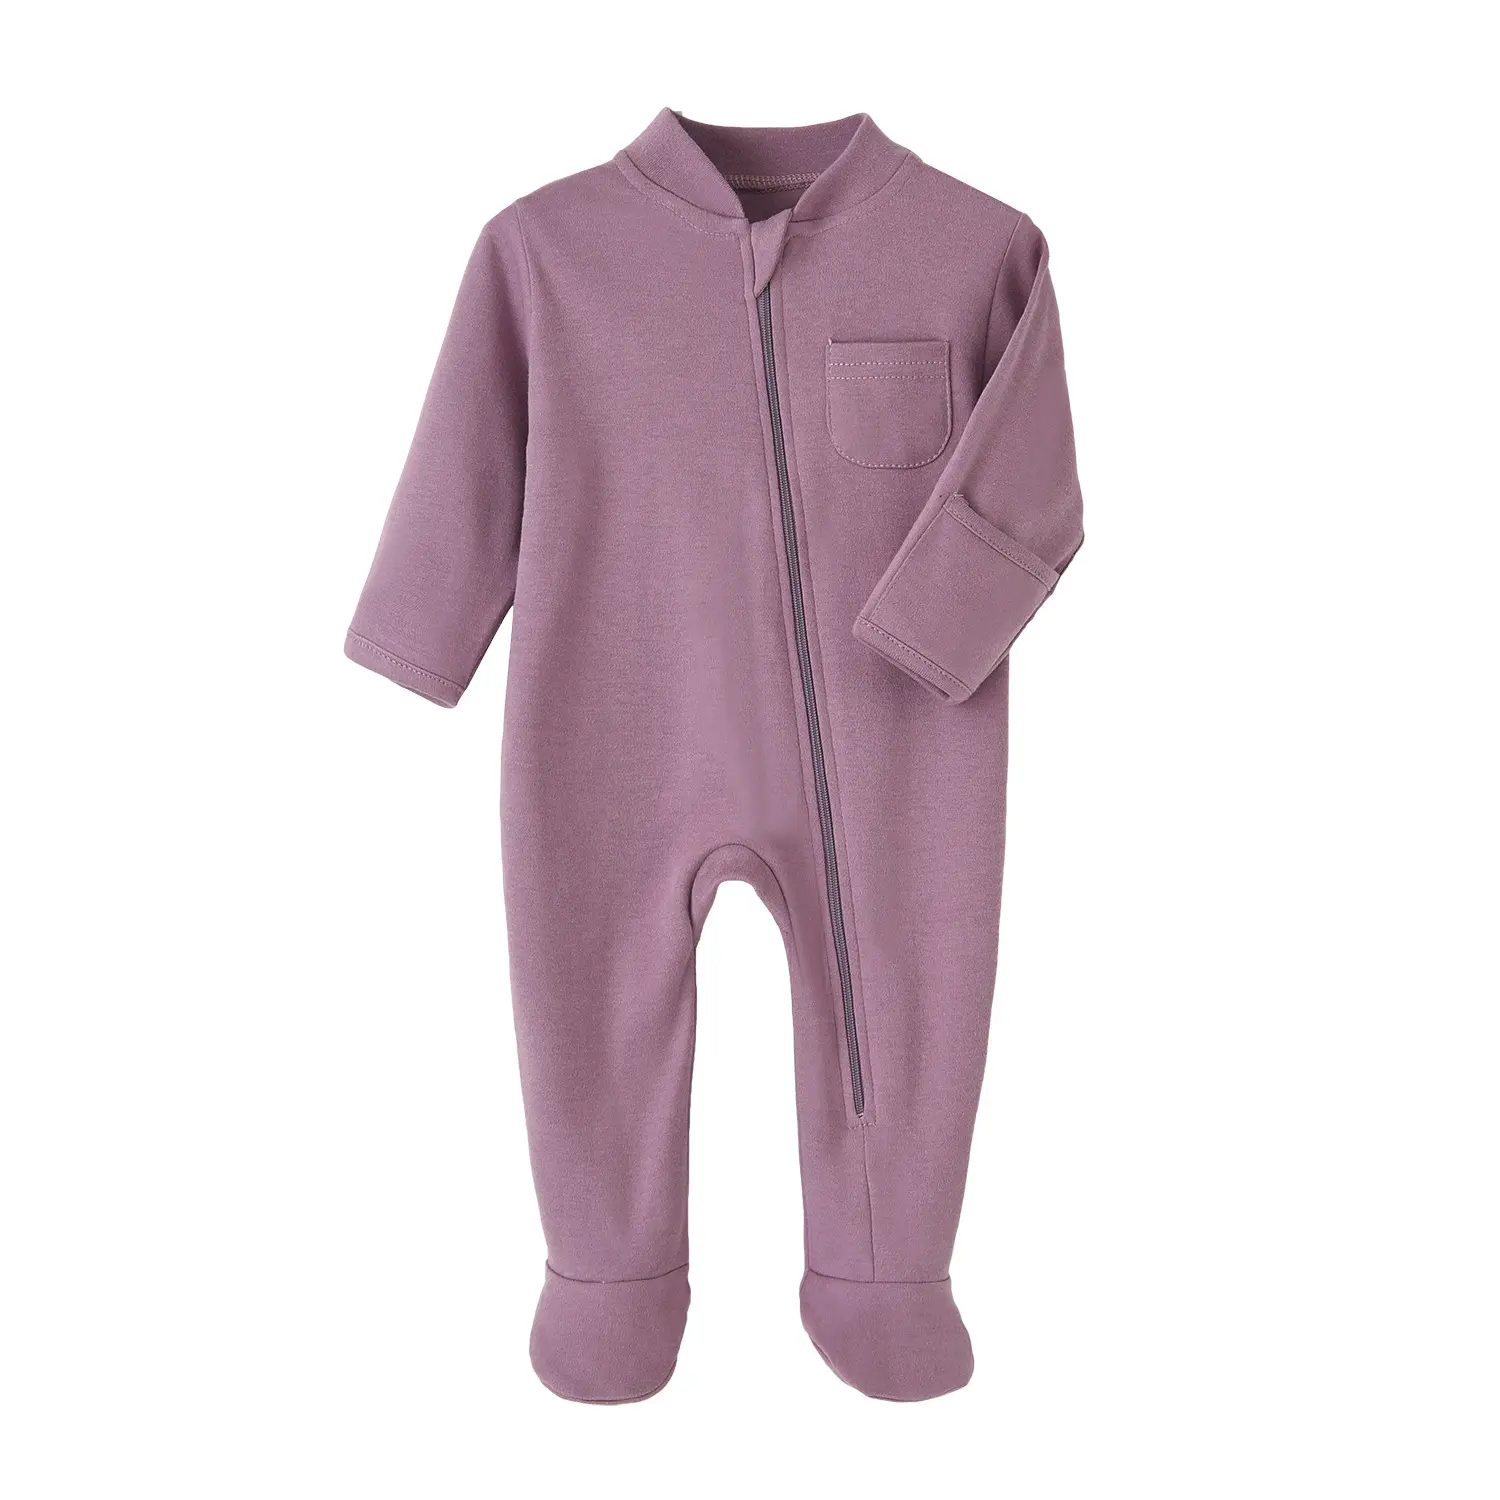 Can Customize Logo and Color Baby Boys Girls Solid Romper Footie Long Sleeve One-Piece Cotton Jumpsuit Outfits Clothes Pajamas